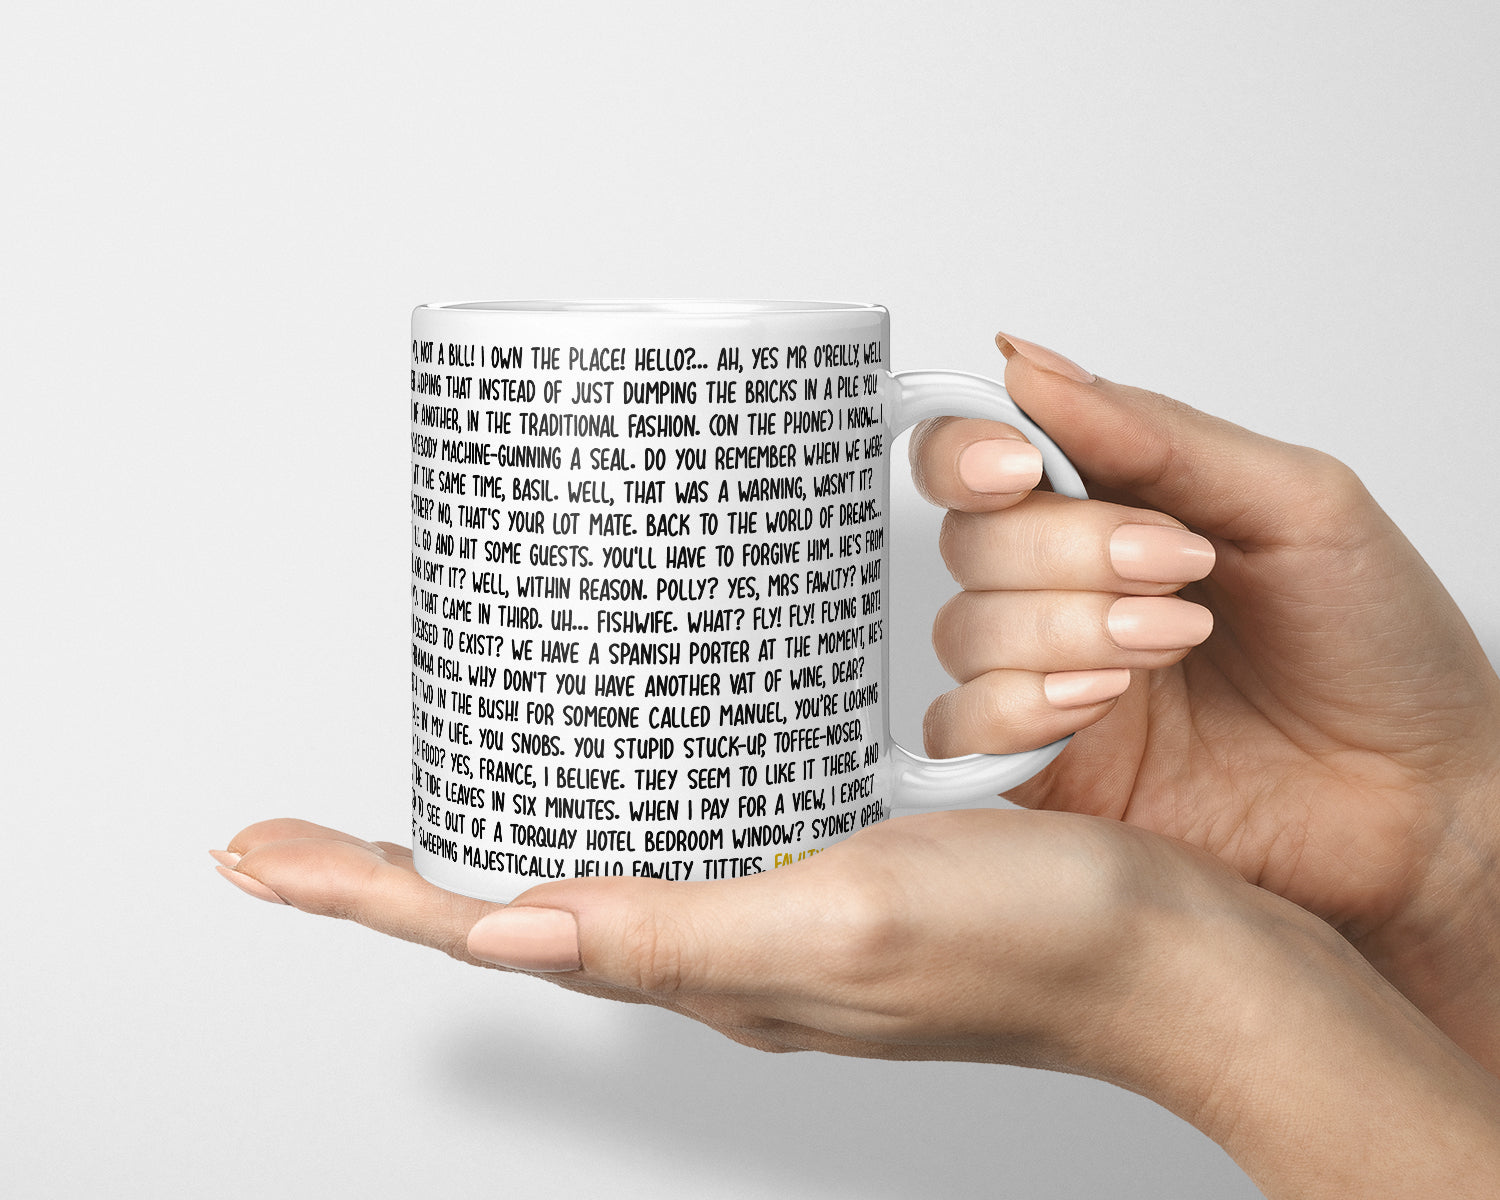 Fawlty Towers Best Quotes, Fawlty Towers Quotes Mug, Fawlty Towers Sign, Fawlty Towers TV Show, Basil Fawlty, Fawlty Rowers Fan